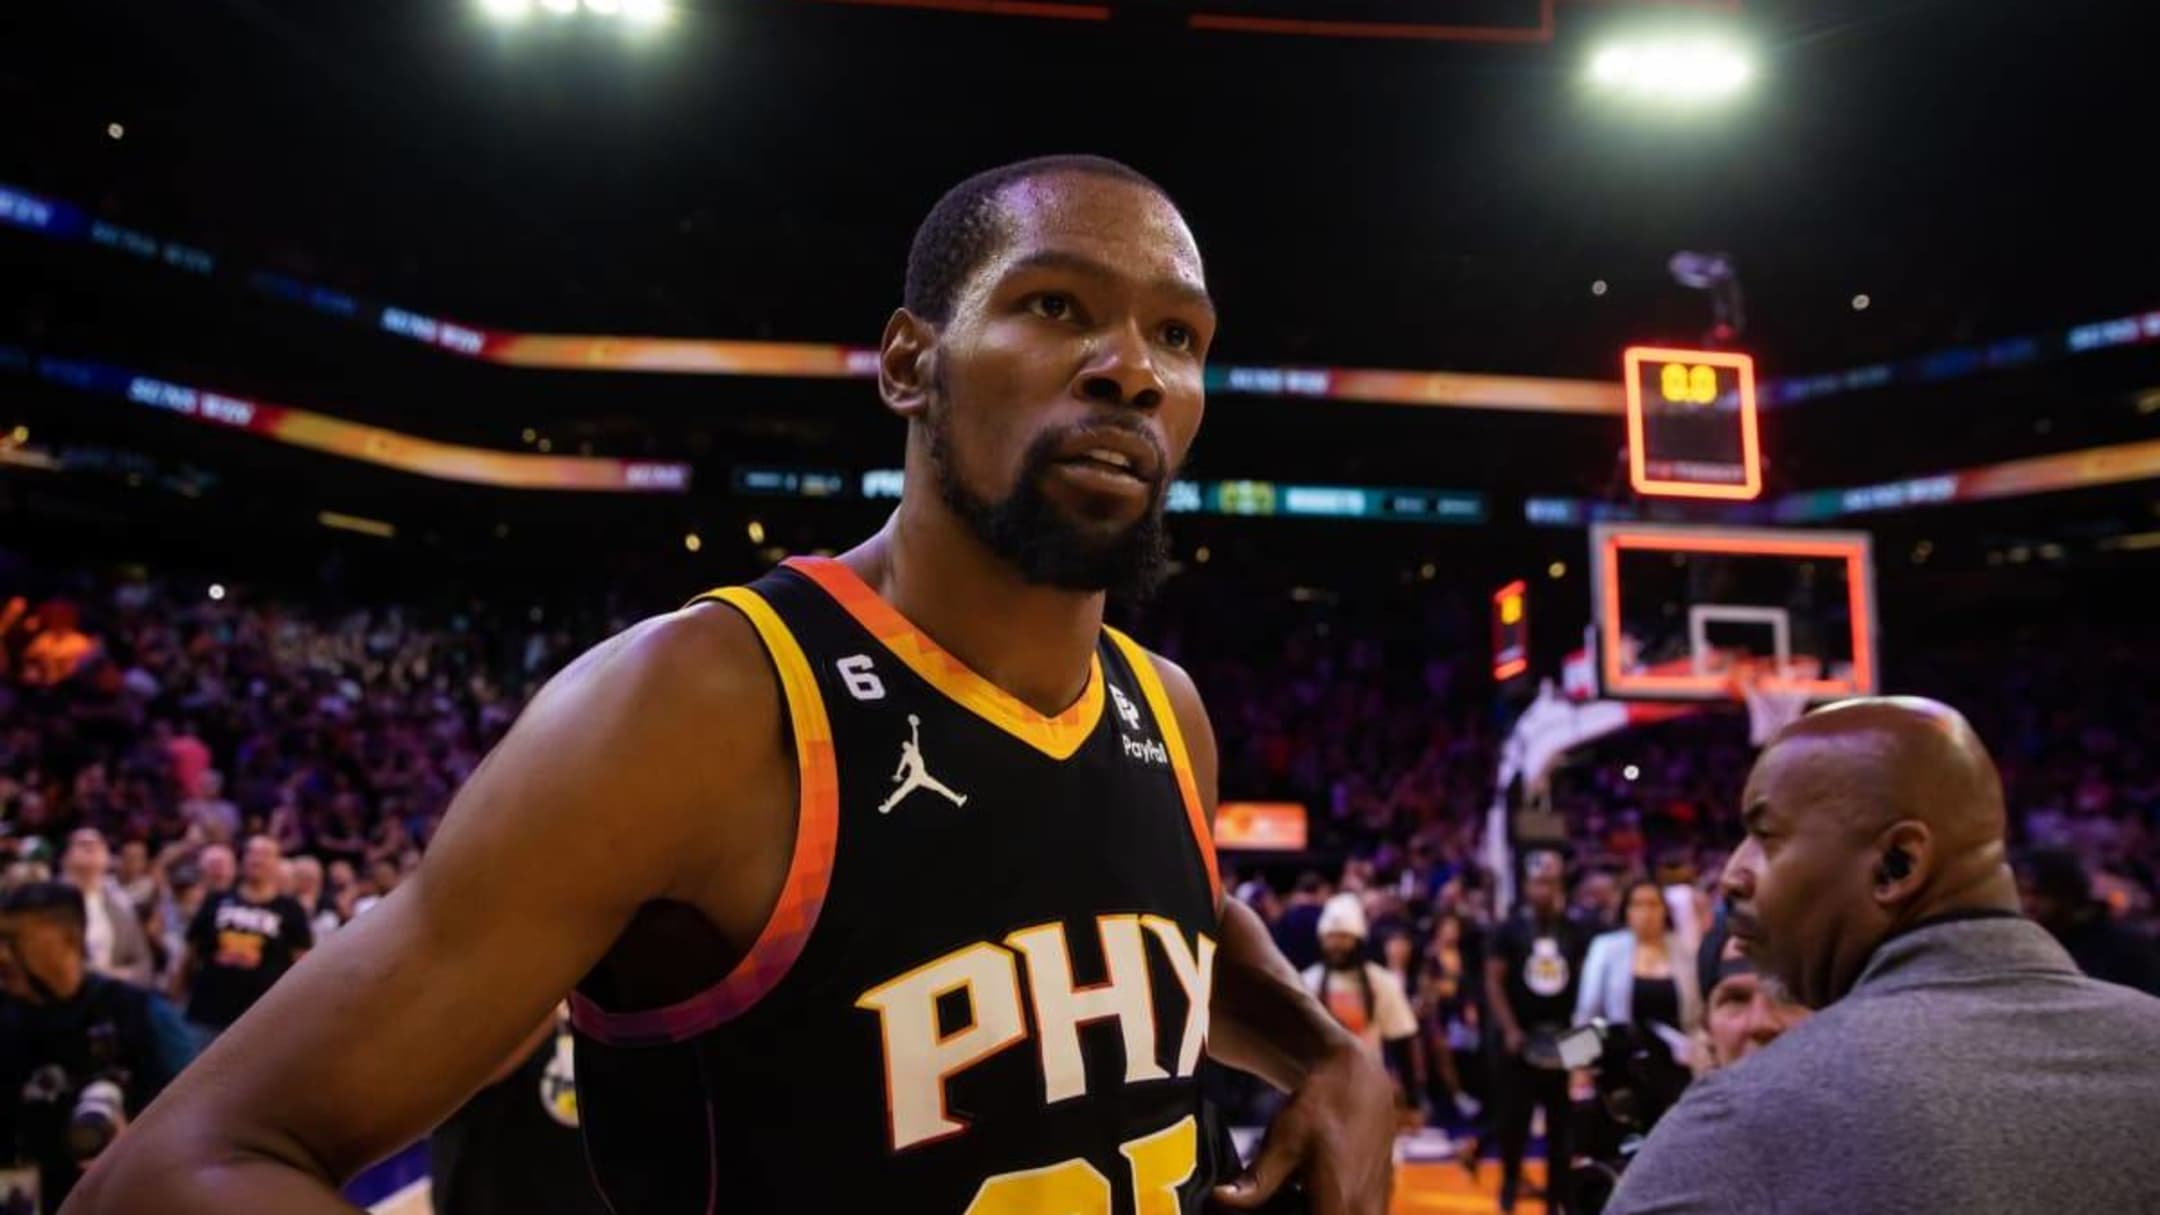 Kevin Durant's Hilarious Tweet After The Nets Beat The Knicks - Fastbreak  on FanNation